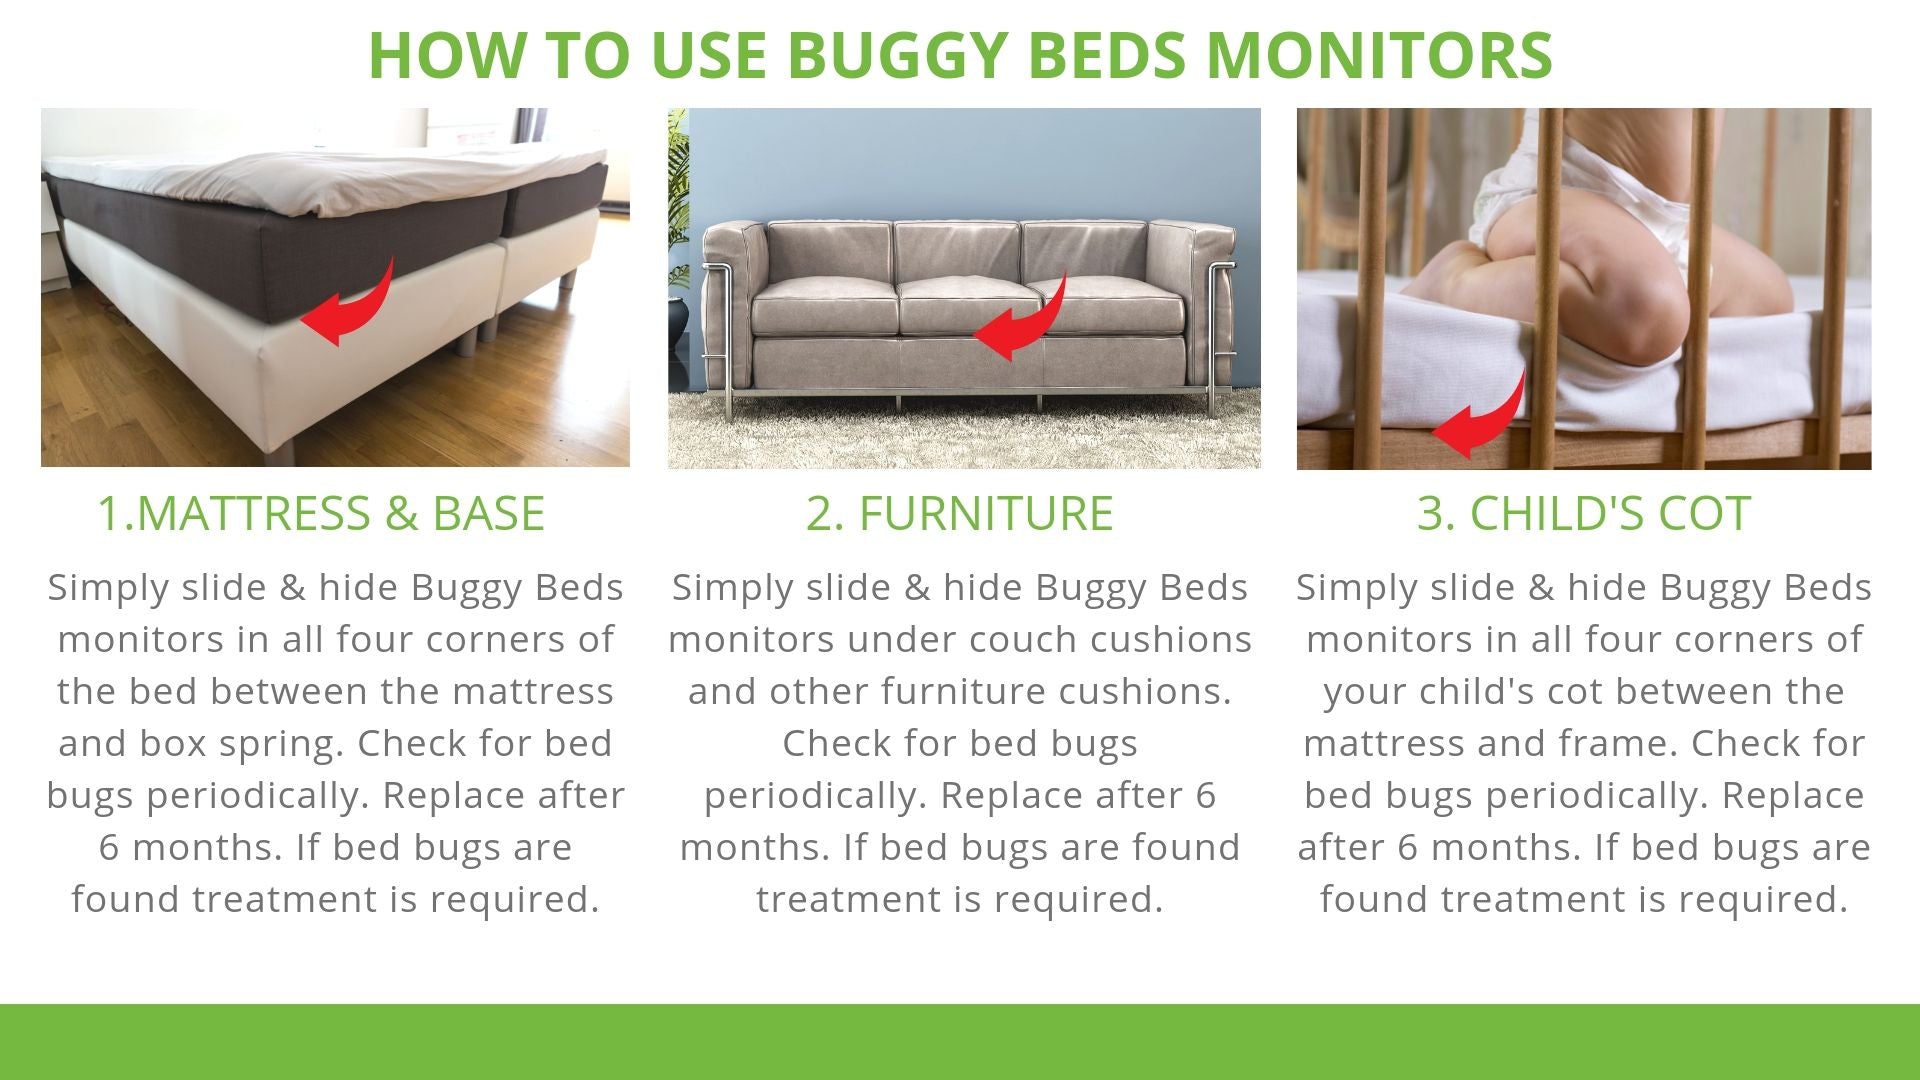 How to use Buggy Beds Bed Bug Monitors